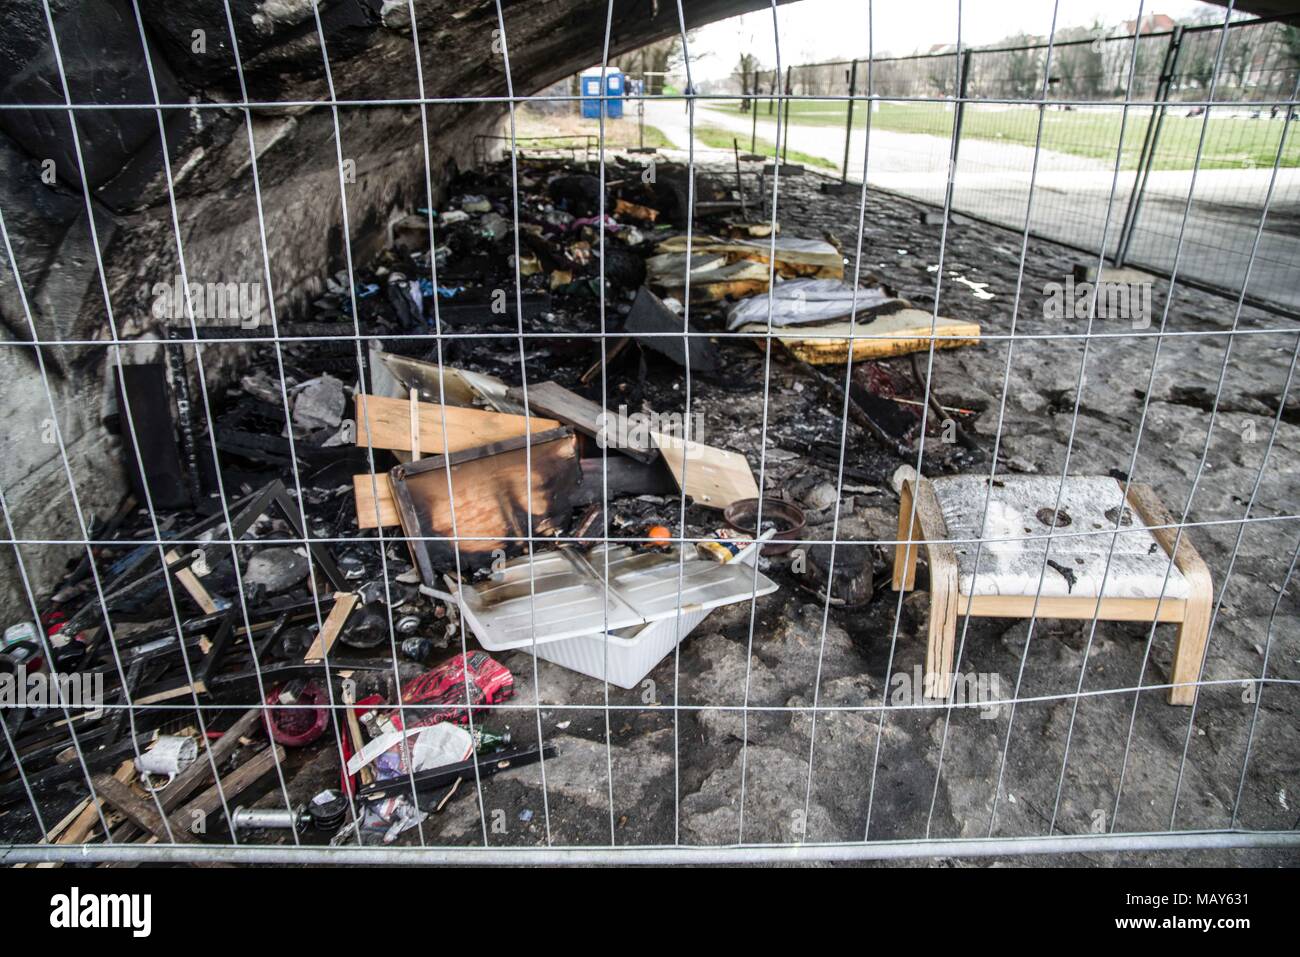 April 5, 2018 - A homeless camp under the ReichenbachbrÃ¼cke (Reichenbach Bridge) in Munich was the target of a suspected arson attack. The photos display the aftermath and the blackening of the surfaces of the bridge, as well as intense heat melting mattresses down to their springs. Damage to the bridge is estimated at 25,000 Euros. Four men, ages 24-53 were living there and unharmed. The suspects may have been two men who were standing near the fire and throwing objects into it. Credit: Sachelle Babbar/ZUMA Wire/Alamy Live News Stock Photo